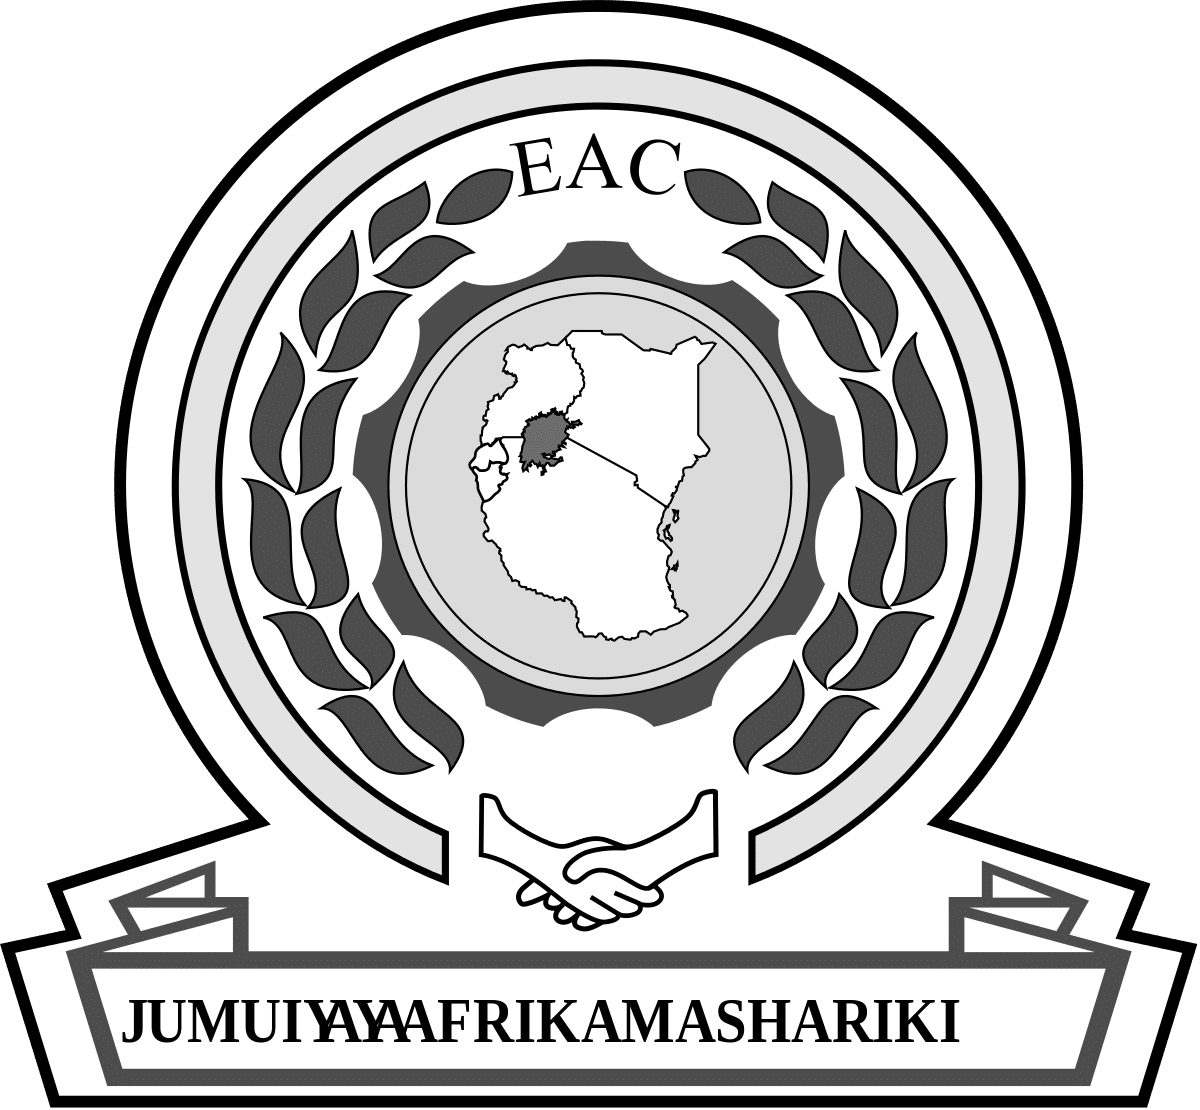 The East African Community is an intergovernmental organisation composed of six countries in the African Great Lakes region in eastern Africa: Burundi, Kenya, Rwanda, South Sudan, Tanzania, and Uganda. Paul Kagame, the president of Rwanda, is the EAC's chairman as of 2021